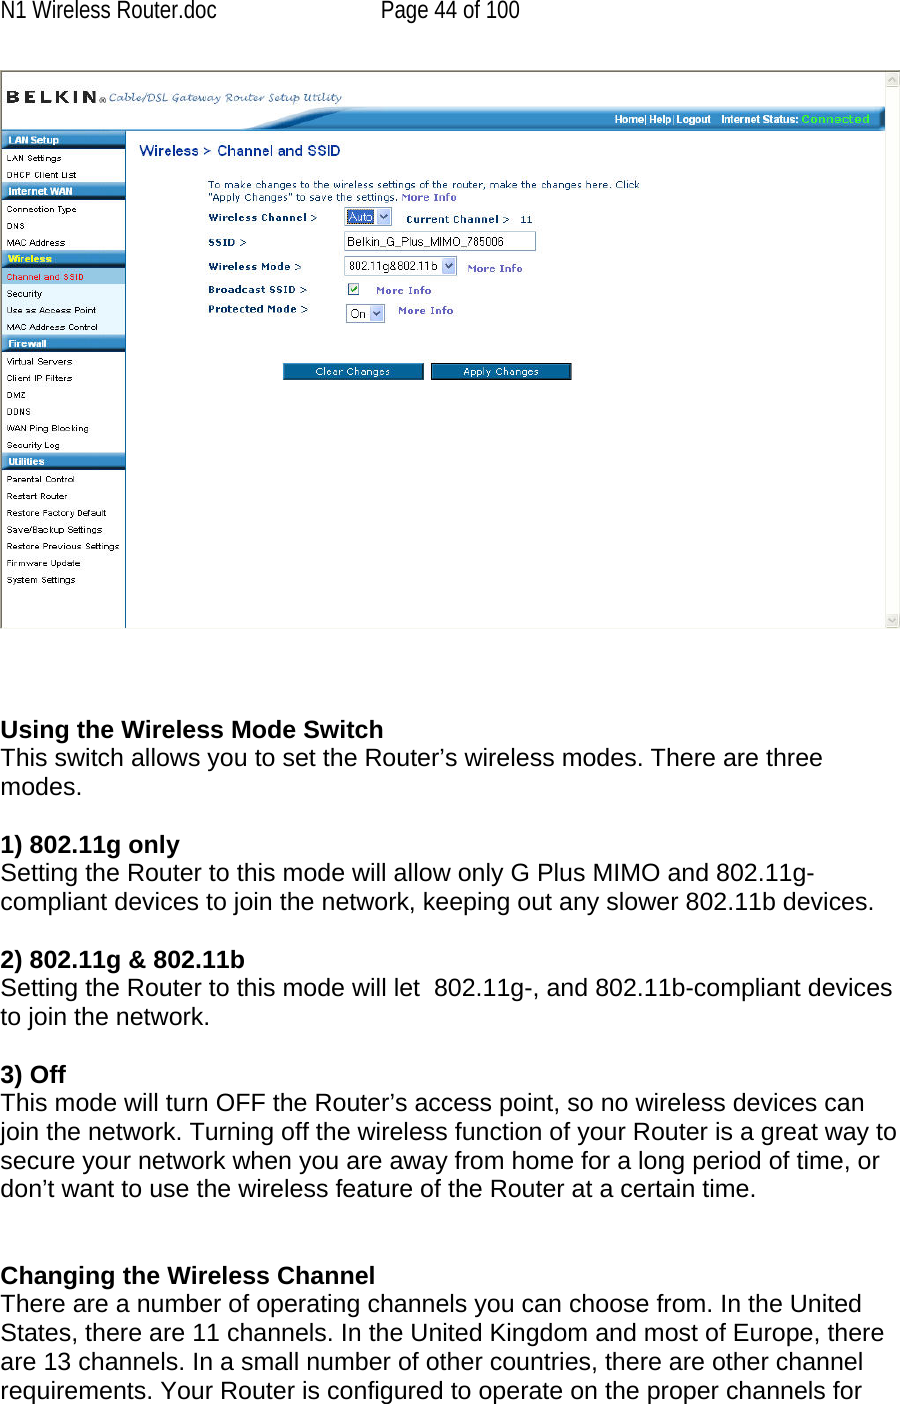 N1 Wireless Router.doc  Page 44 of 100     Using the Wireless Mode Switch This switch allows you to set the Router’s wireless modes. There are three modes.  1) 802.11g only Setting the Router to this mode will allow only G Plus MIMO and 802.11g-compliant devices to join the network, keeping out any slower 802.11b devices.  2) 802.11g &amp; 802.11b Setting the Router to this mode will let  802.11g-, and 802.11b-compliant devices to join the network.  3) Off This mode will turn OFF the Router’s access point, so no wireless devices can join the network. Turning off the wireless function of your Router is a great way to secure your network when you are away from home for a long period of time, or don’t want to use the wireless feature of the Router at a certain time.   Changing the Wireless Channel There are a number of operating channels you can choose from. In the United States, there are 11 channels. In the United Kingdom and most of Europe, there are 13 channels. In a small number of other countries, there are other channel requirements. Your Router is configured to operate on the proper channels for 